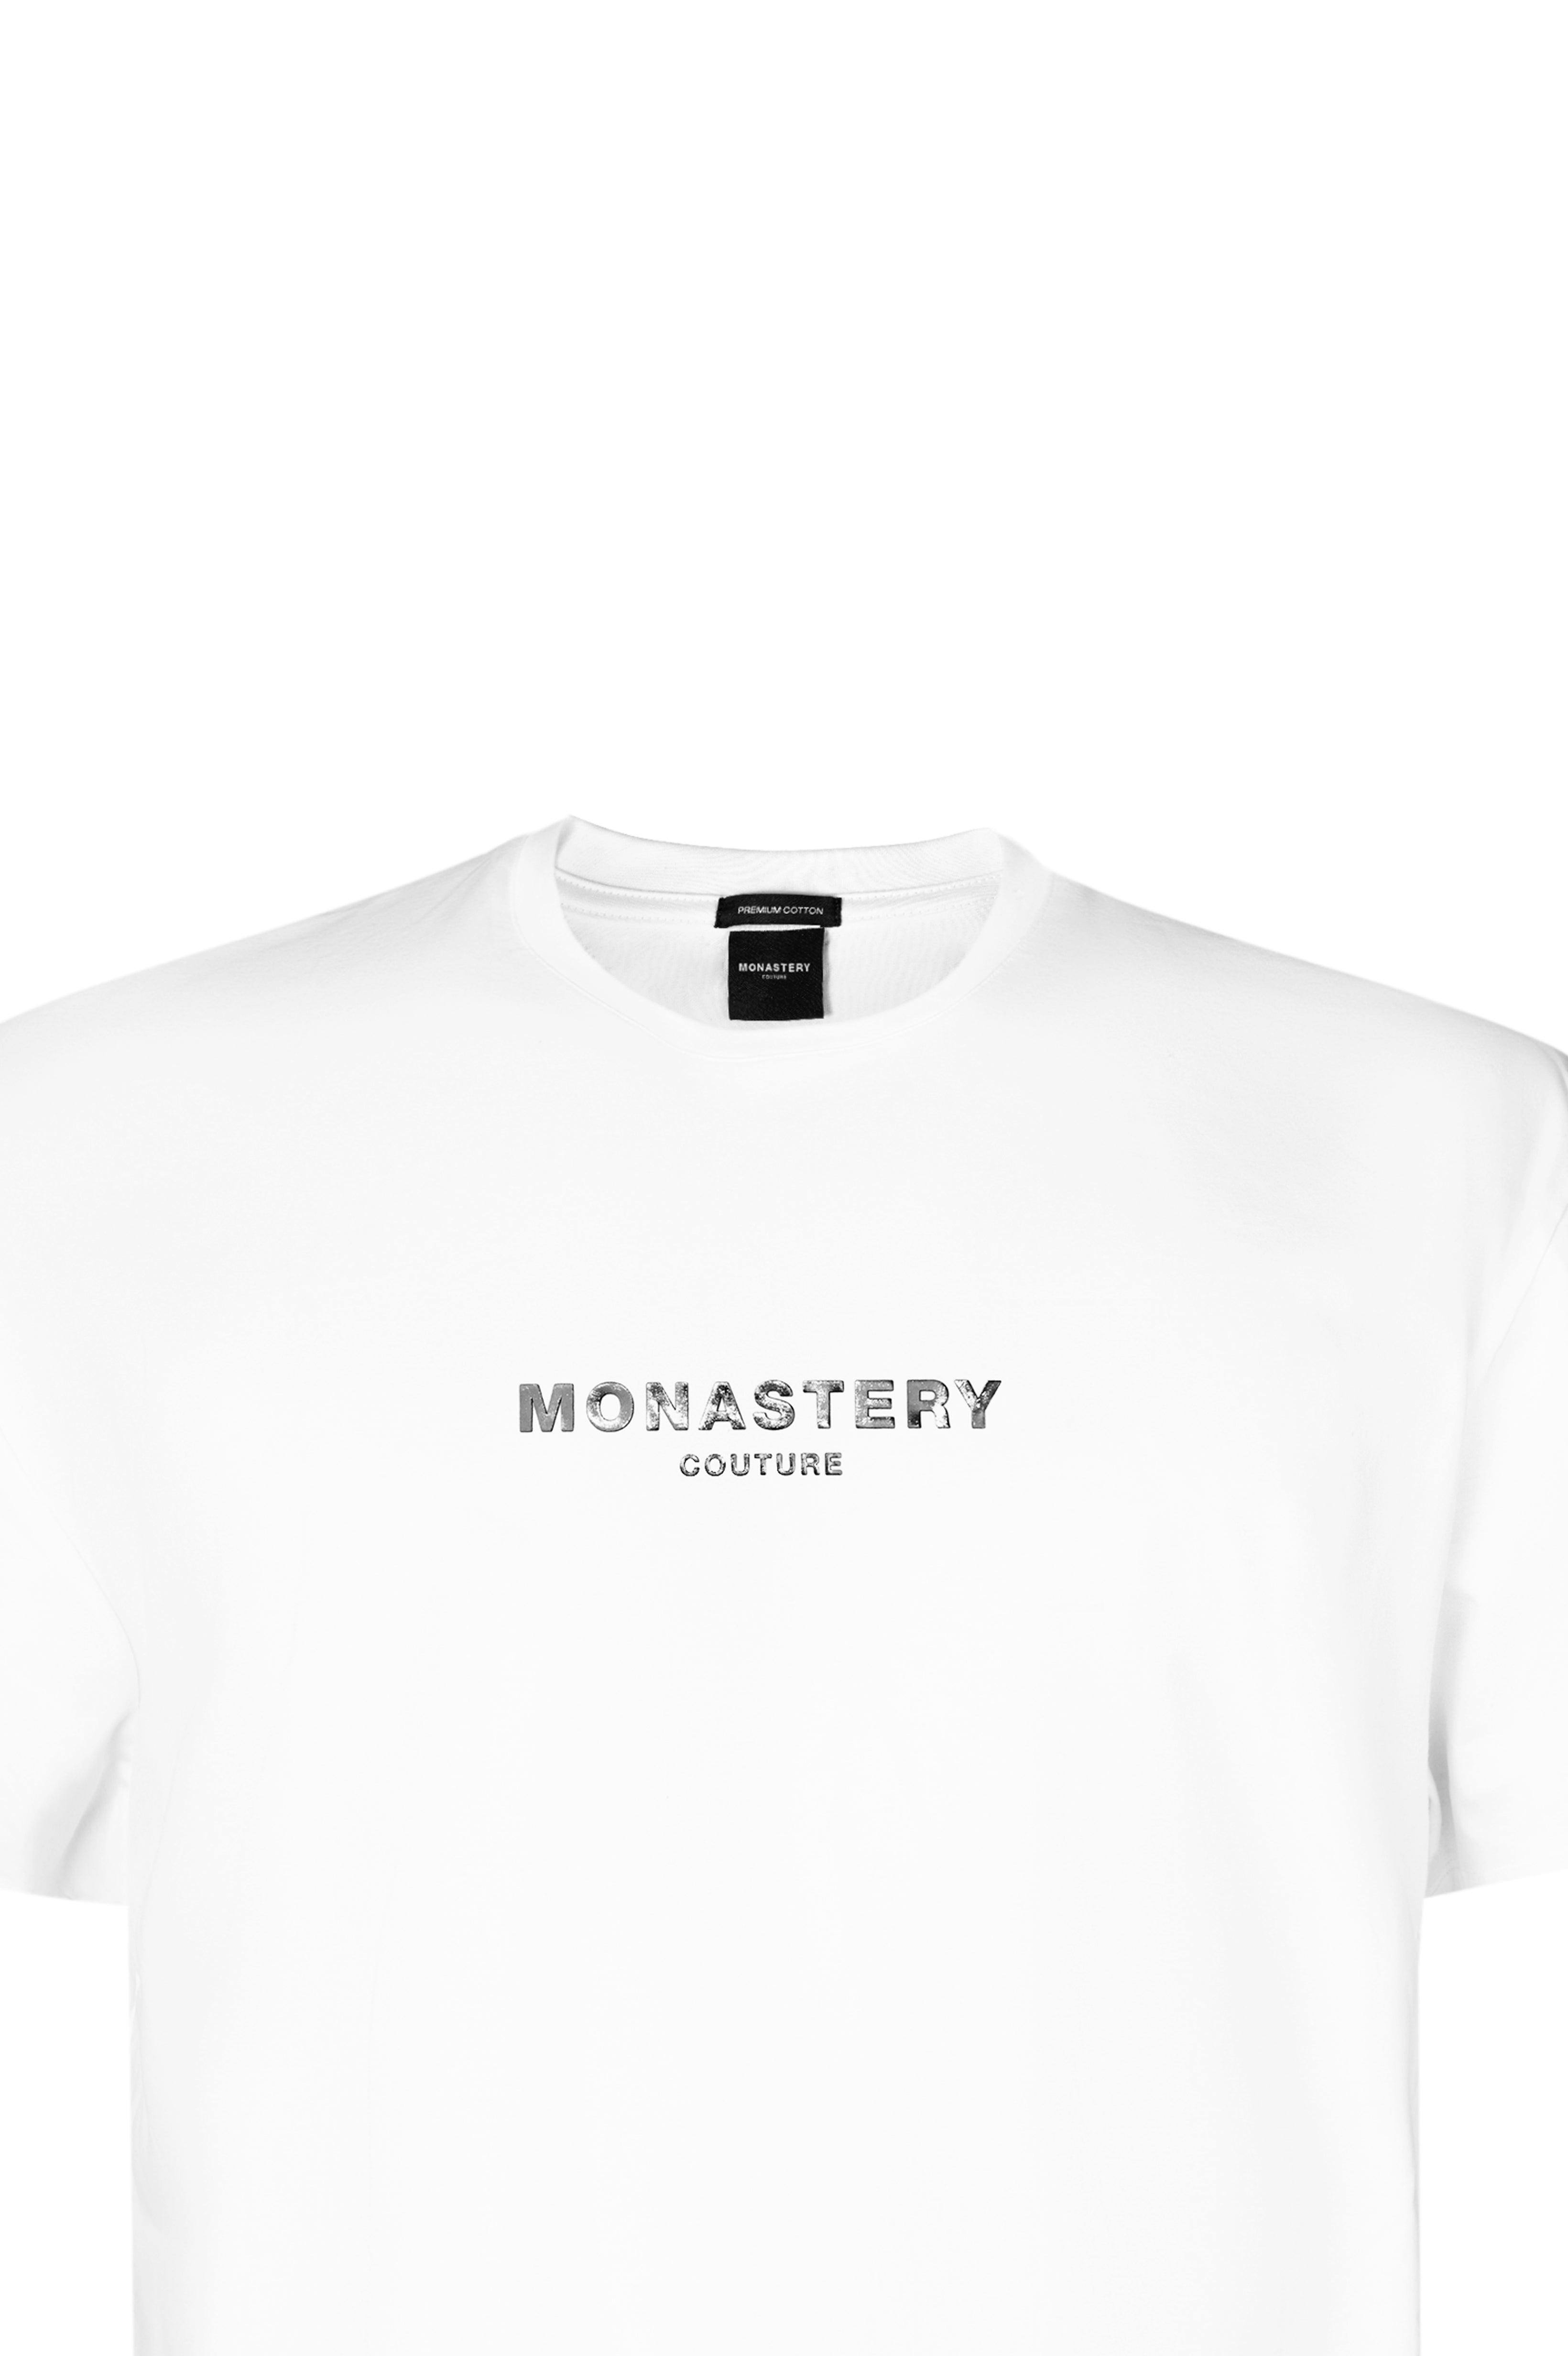 BUDAPEST T-SHIRT OVERSIZE WHITE | Monastery Couture